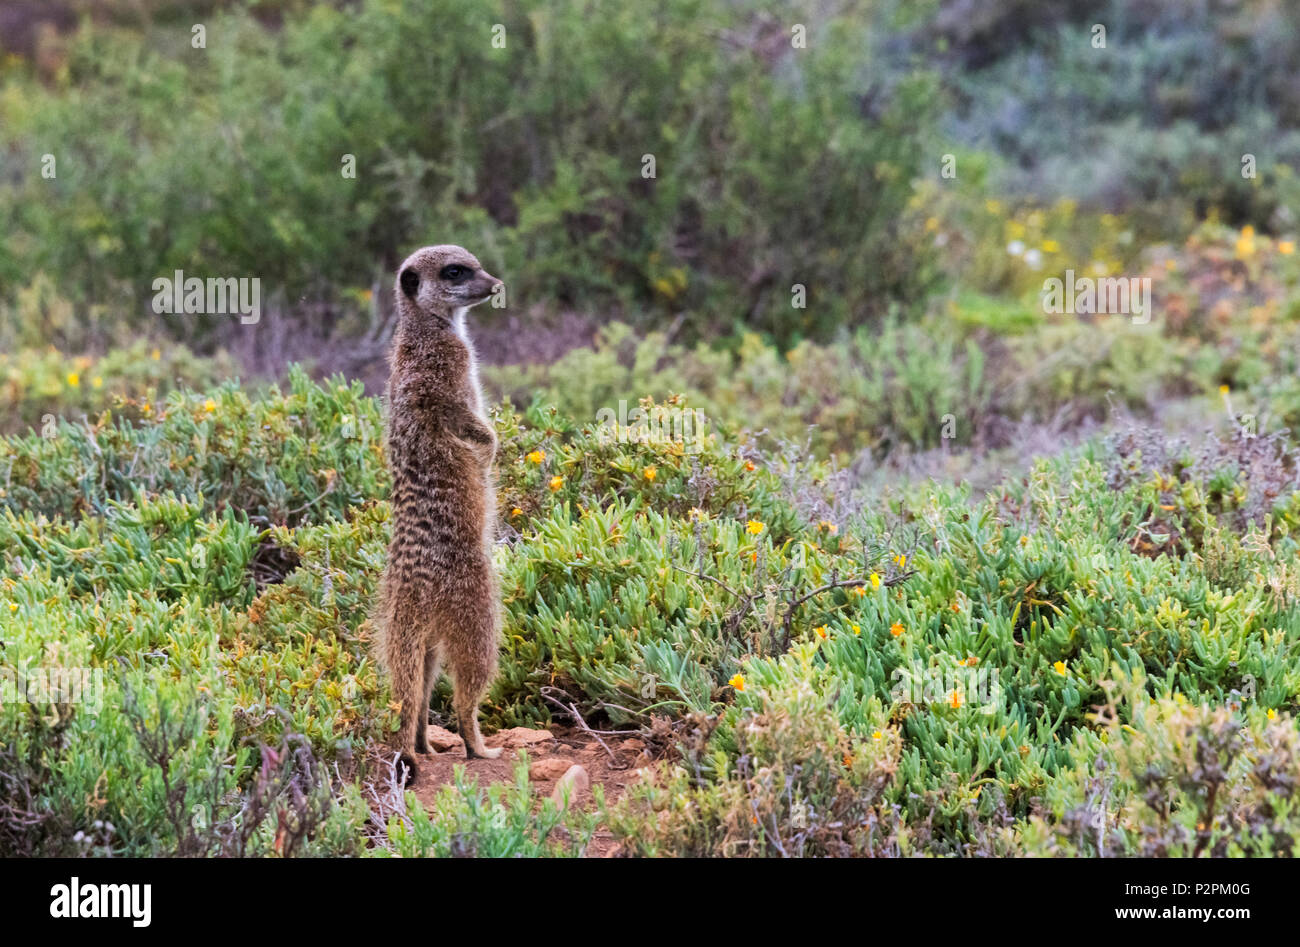 Meerkat, Western Cape Province, South Africa Stock Photo